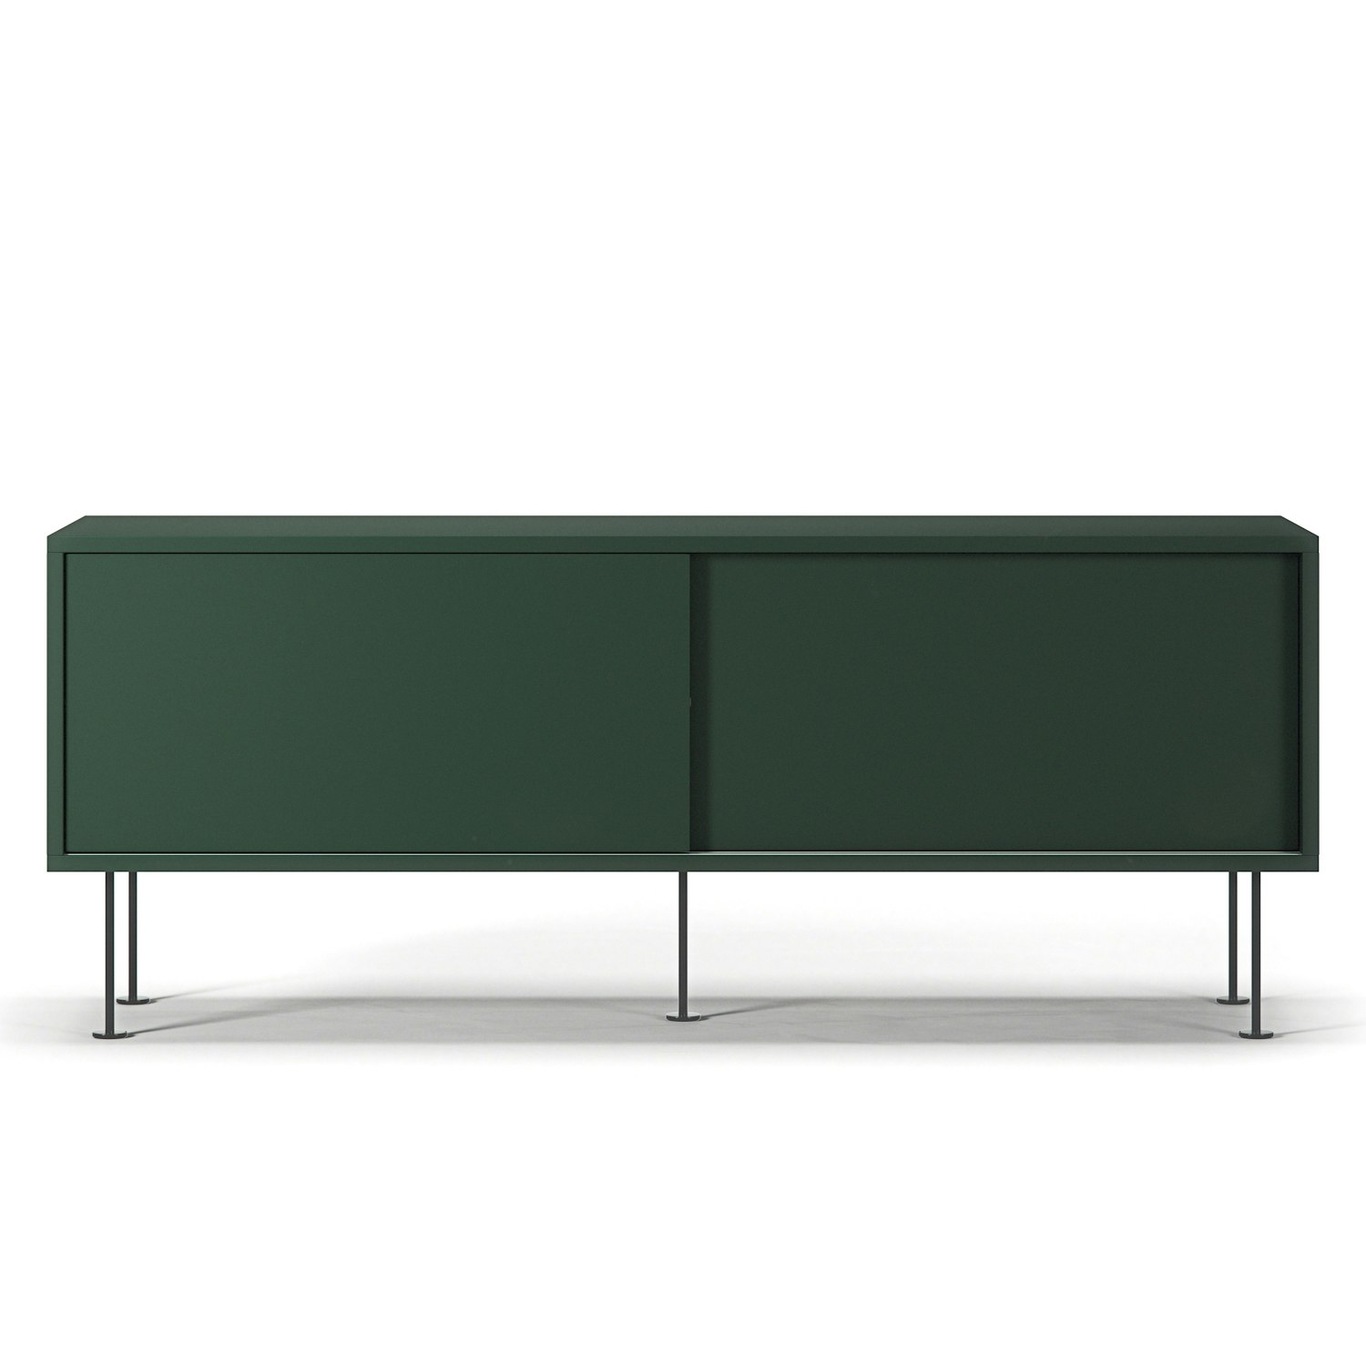 Vogue Media Bench With Legs 136 cm, Green / Black